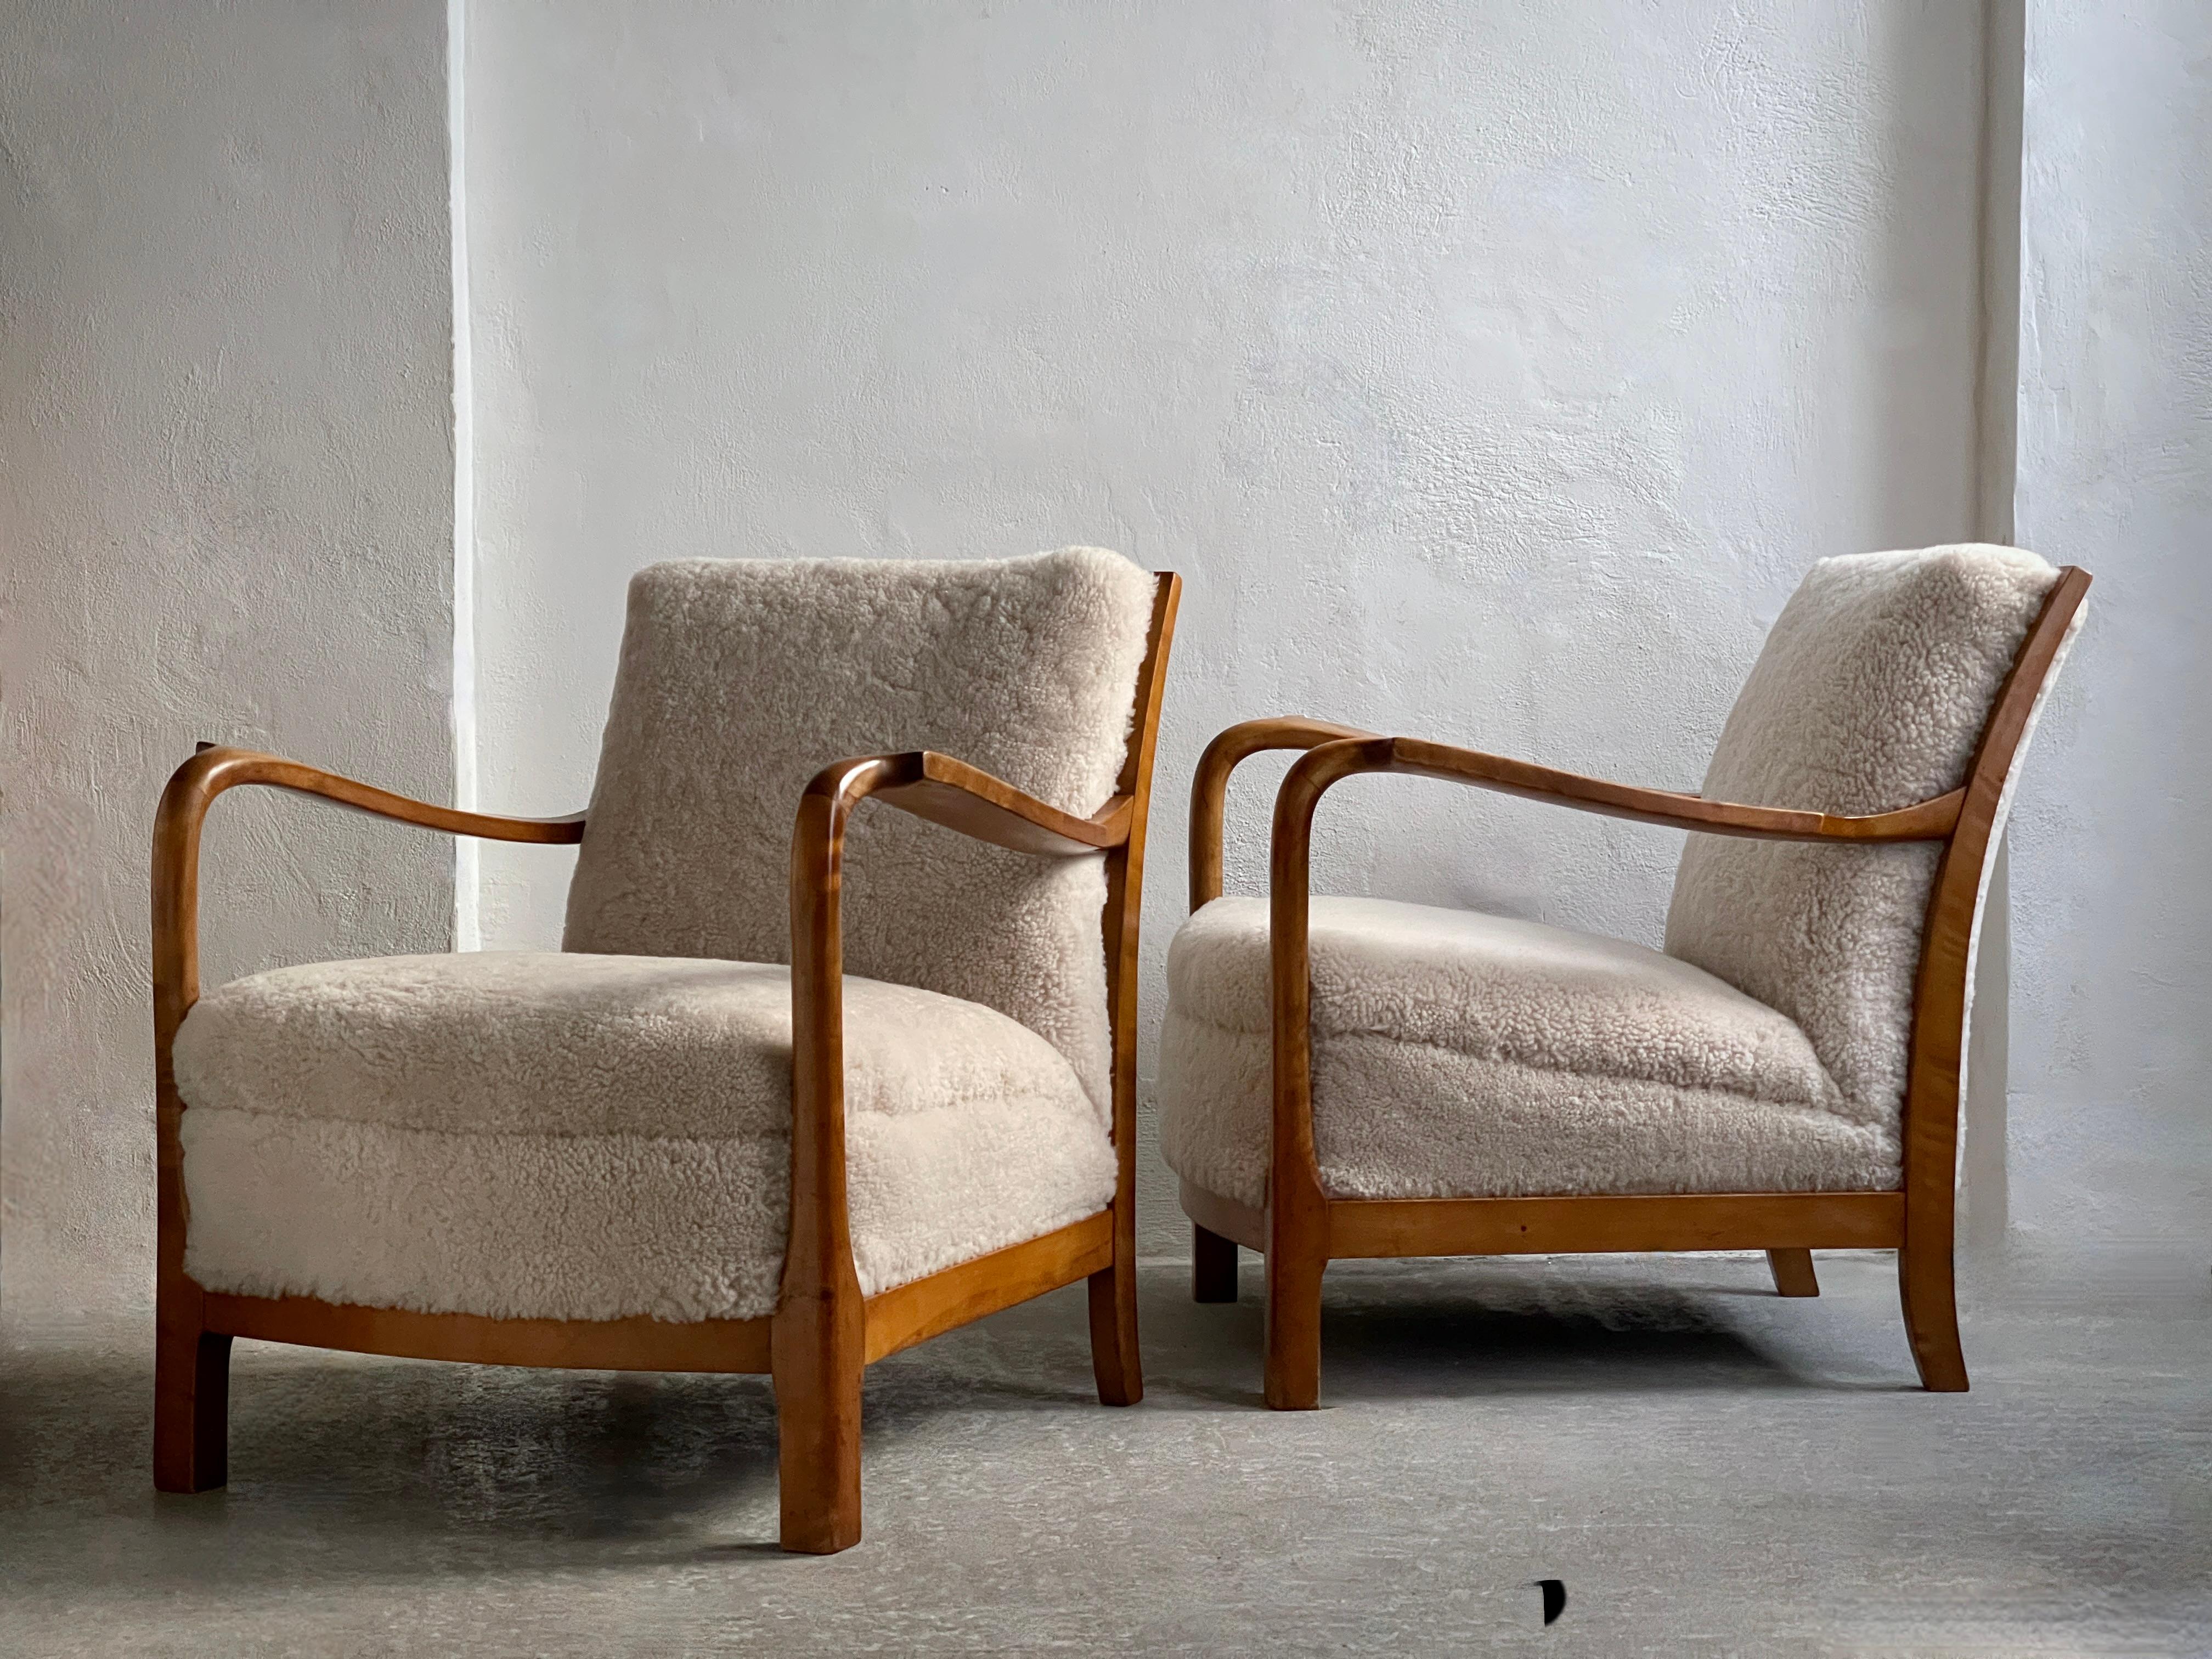 These exceptional lounge chairs, a rare find from the 1940s, represent a pinnacle of Danish craftsmanship and design. Crafted by a master cabinet maker, each chair is a testament to the meticulous artistry and dedication to authenticity that defined